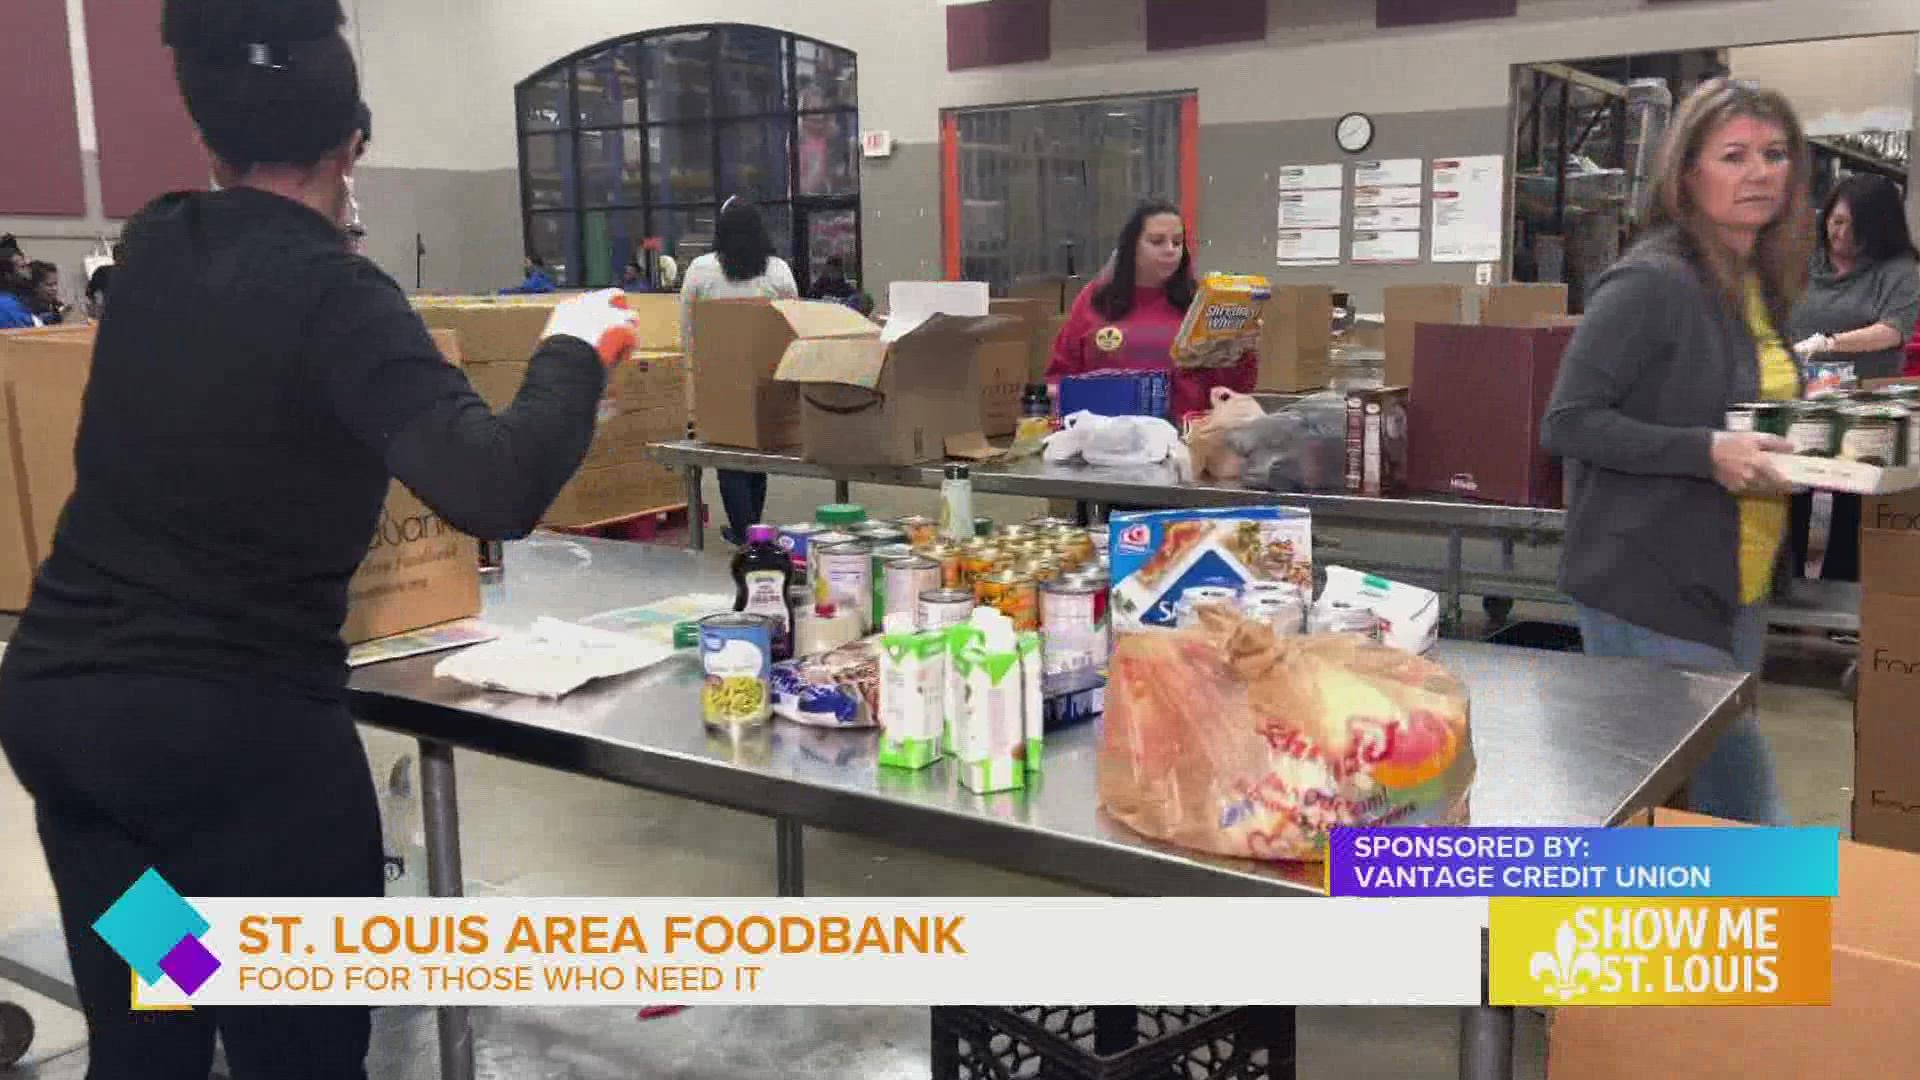 St. Louis Area Foodbank supports over 20 counties by way of distributing food to those in need through their network of partner agencies.